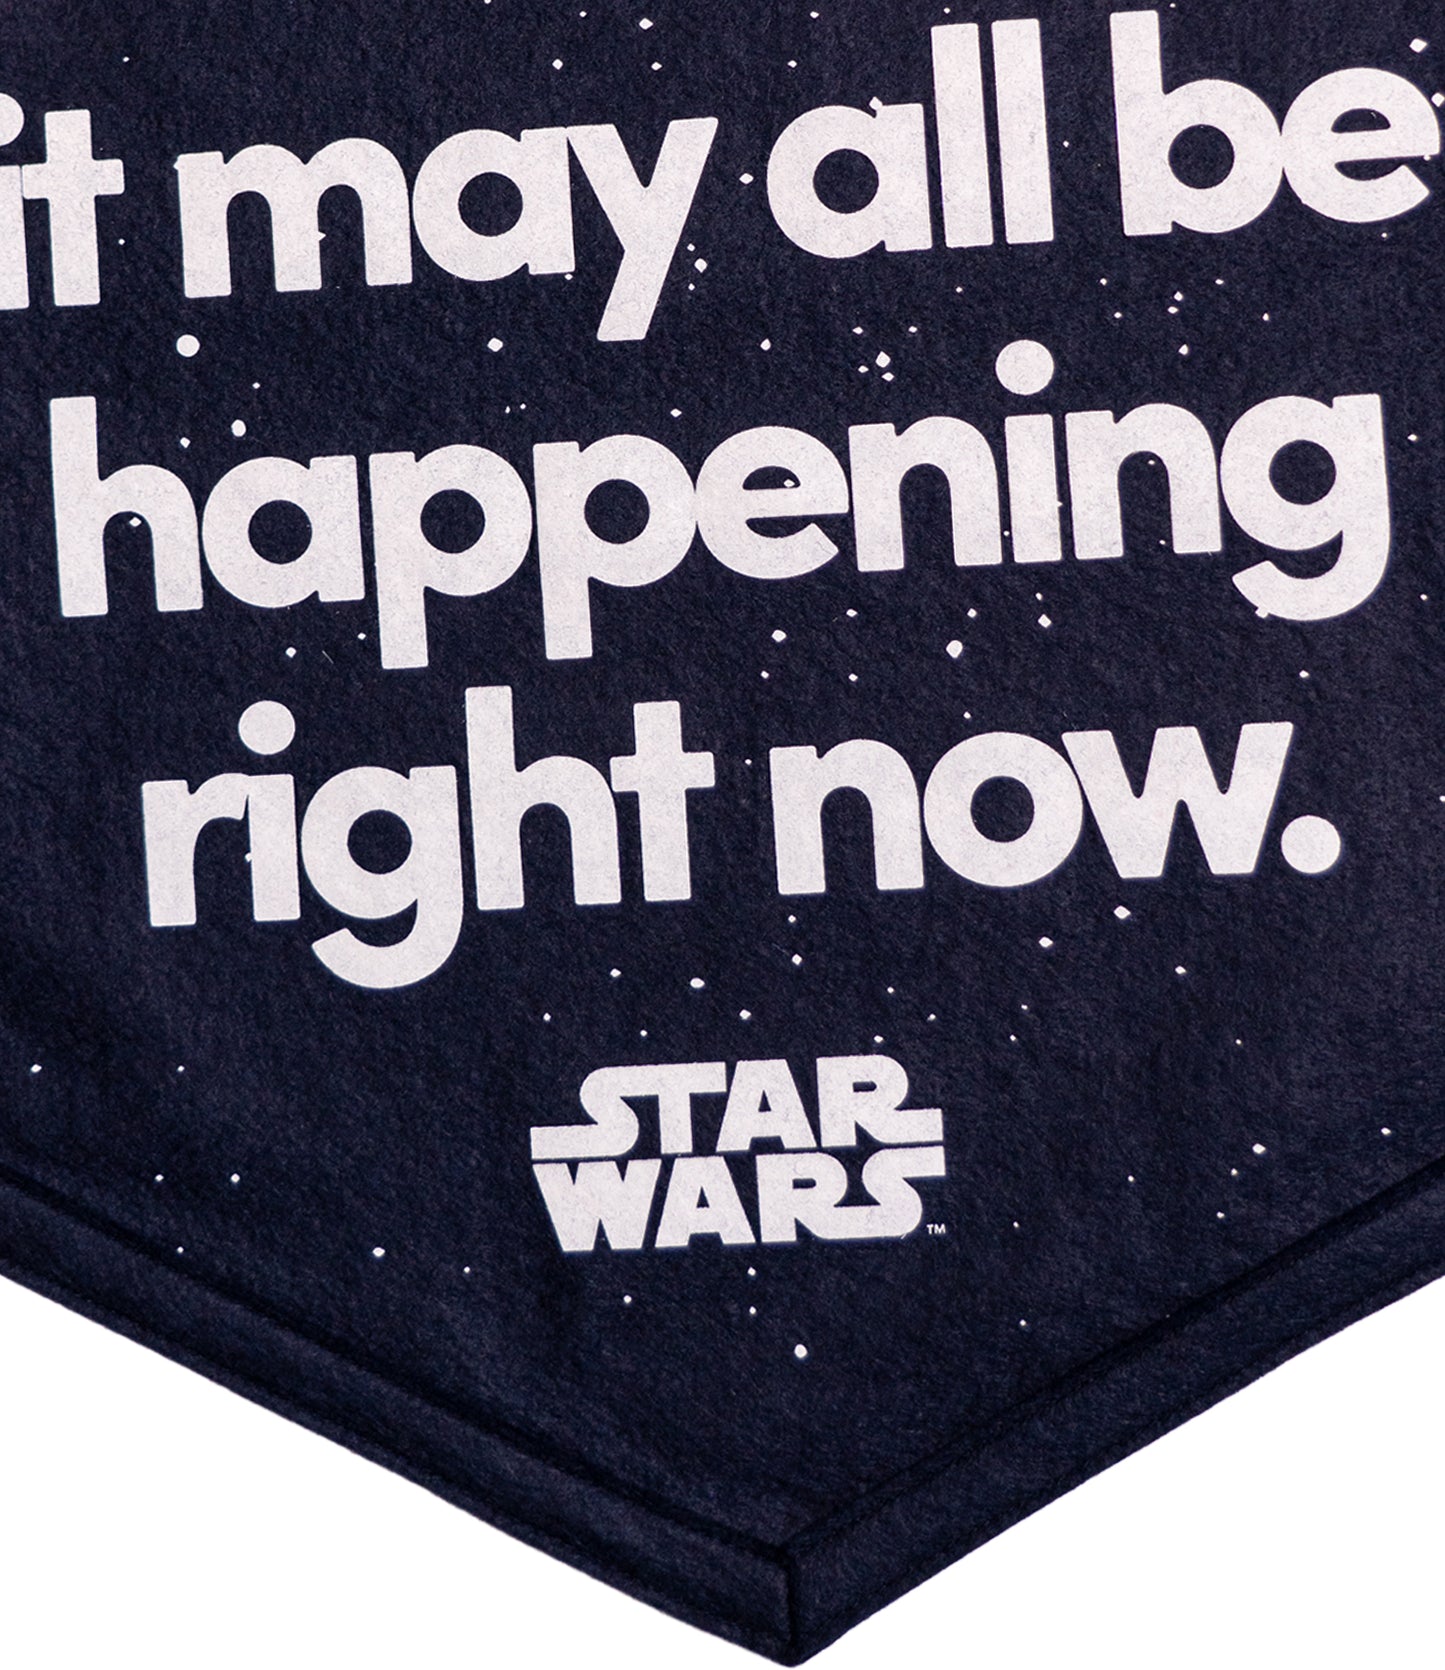 STAR WARS™ Somewhere Out There Camp Flag